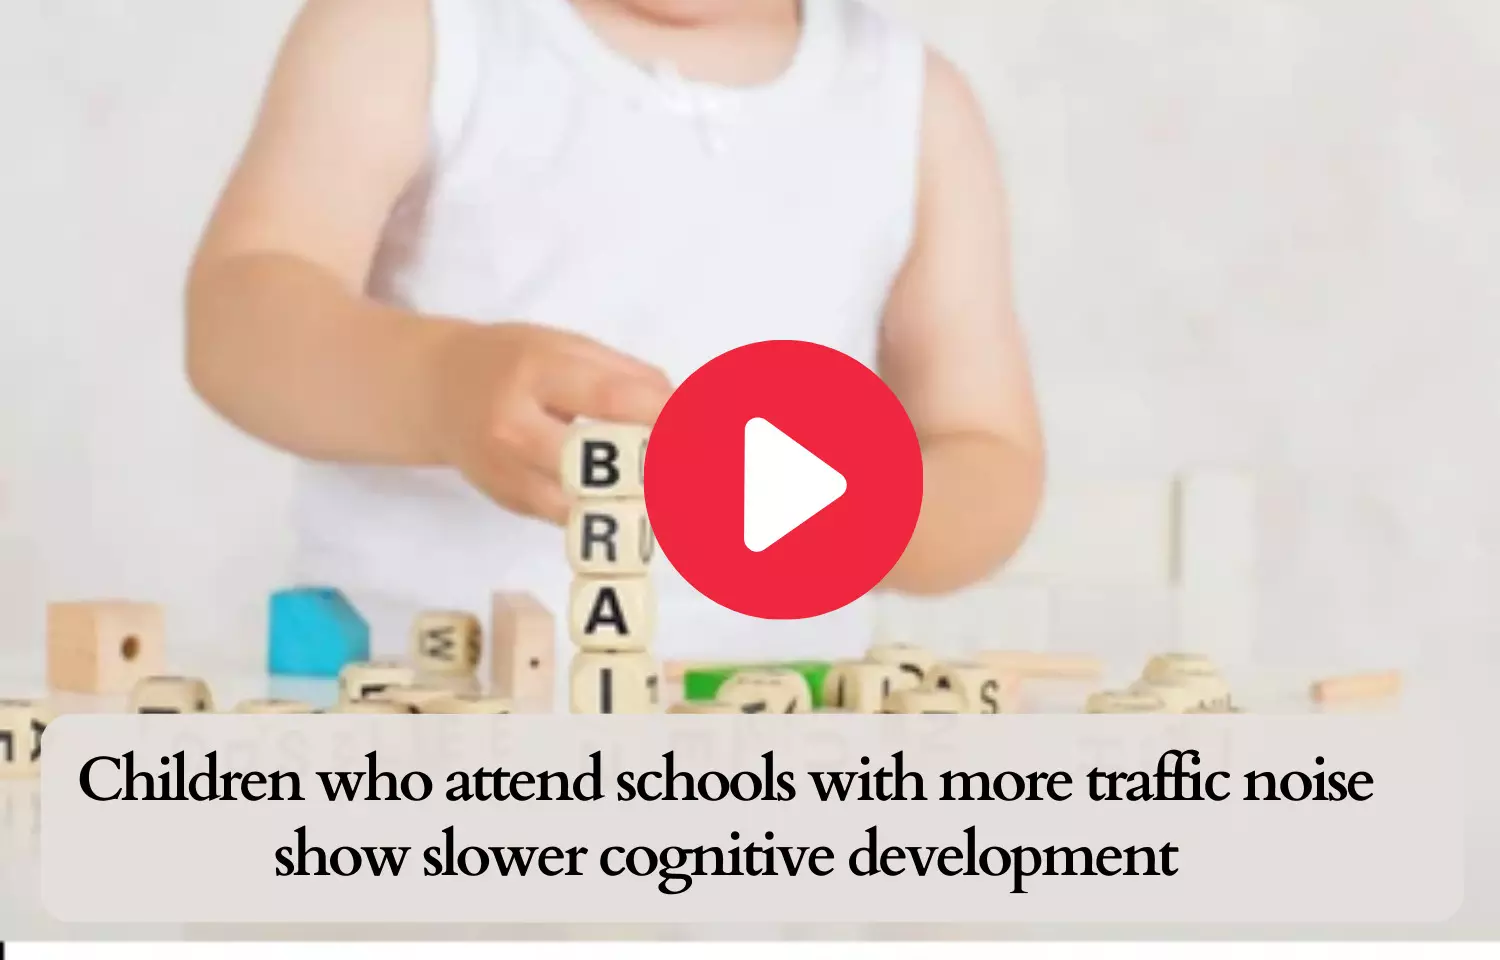 Children who attend schools with more traffic noise show slower cognitive development